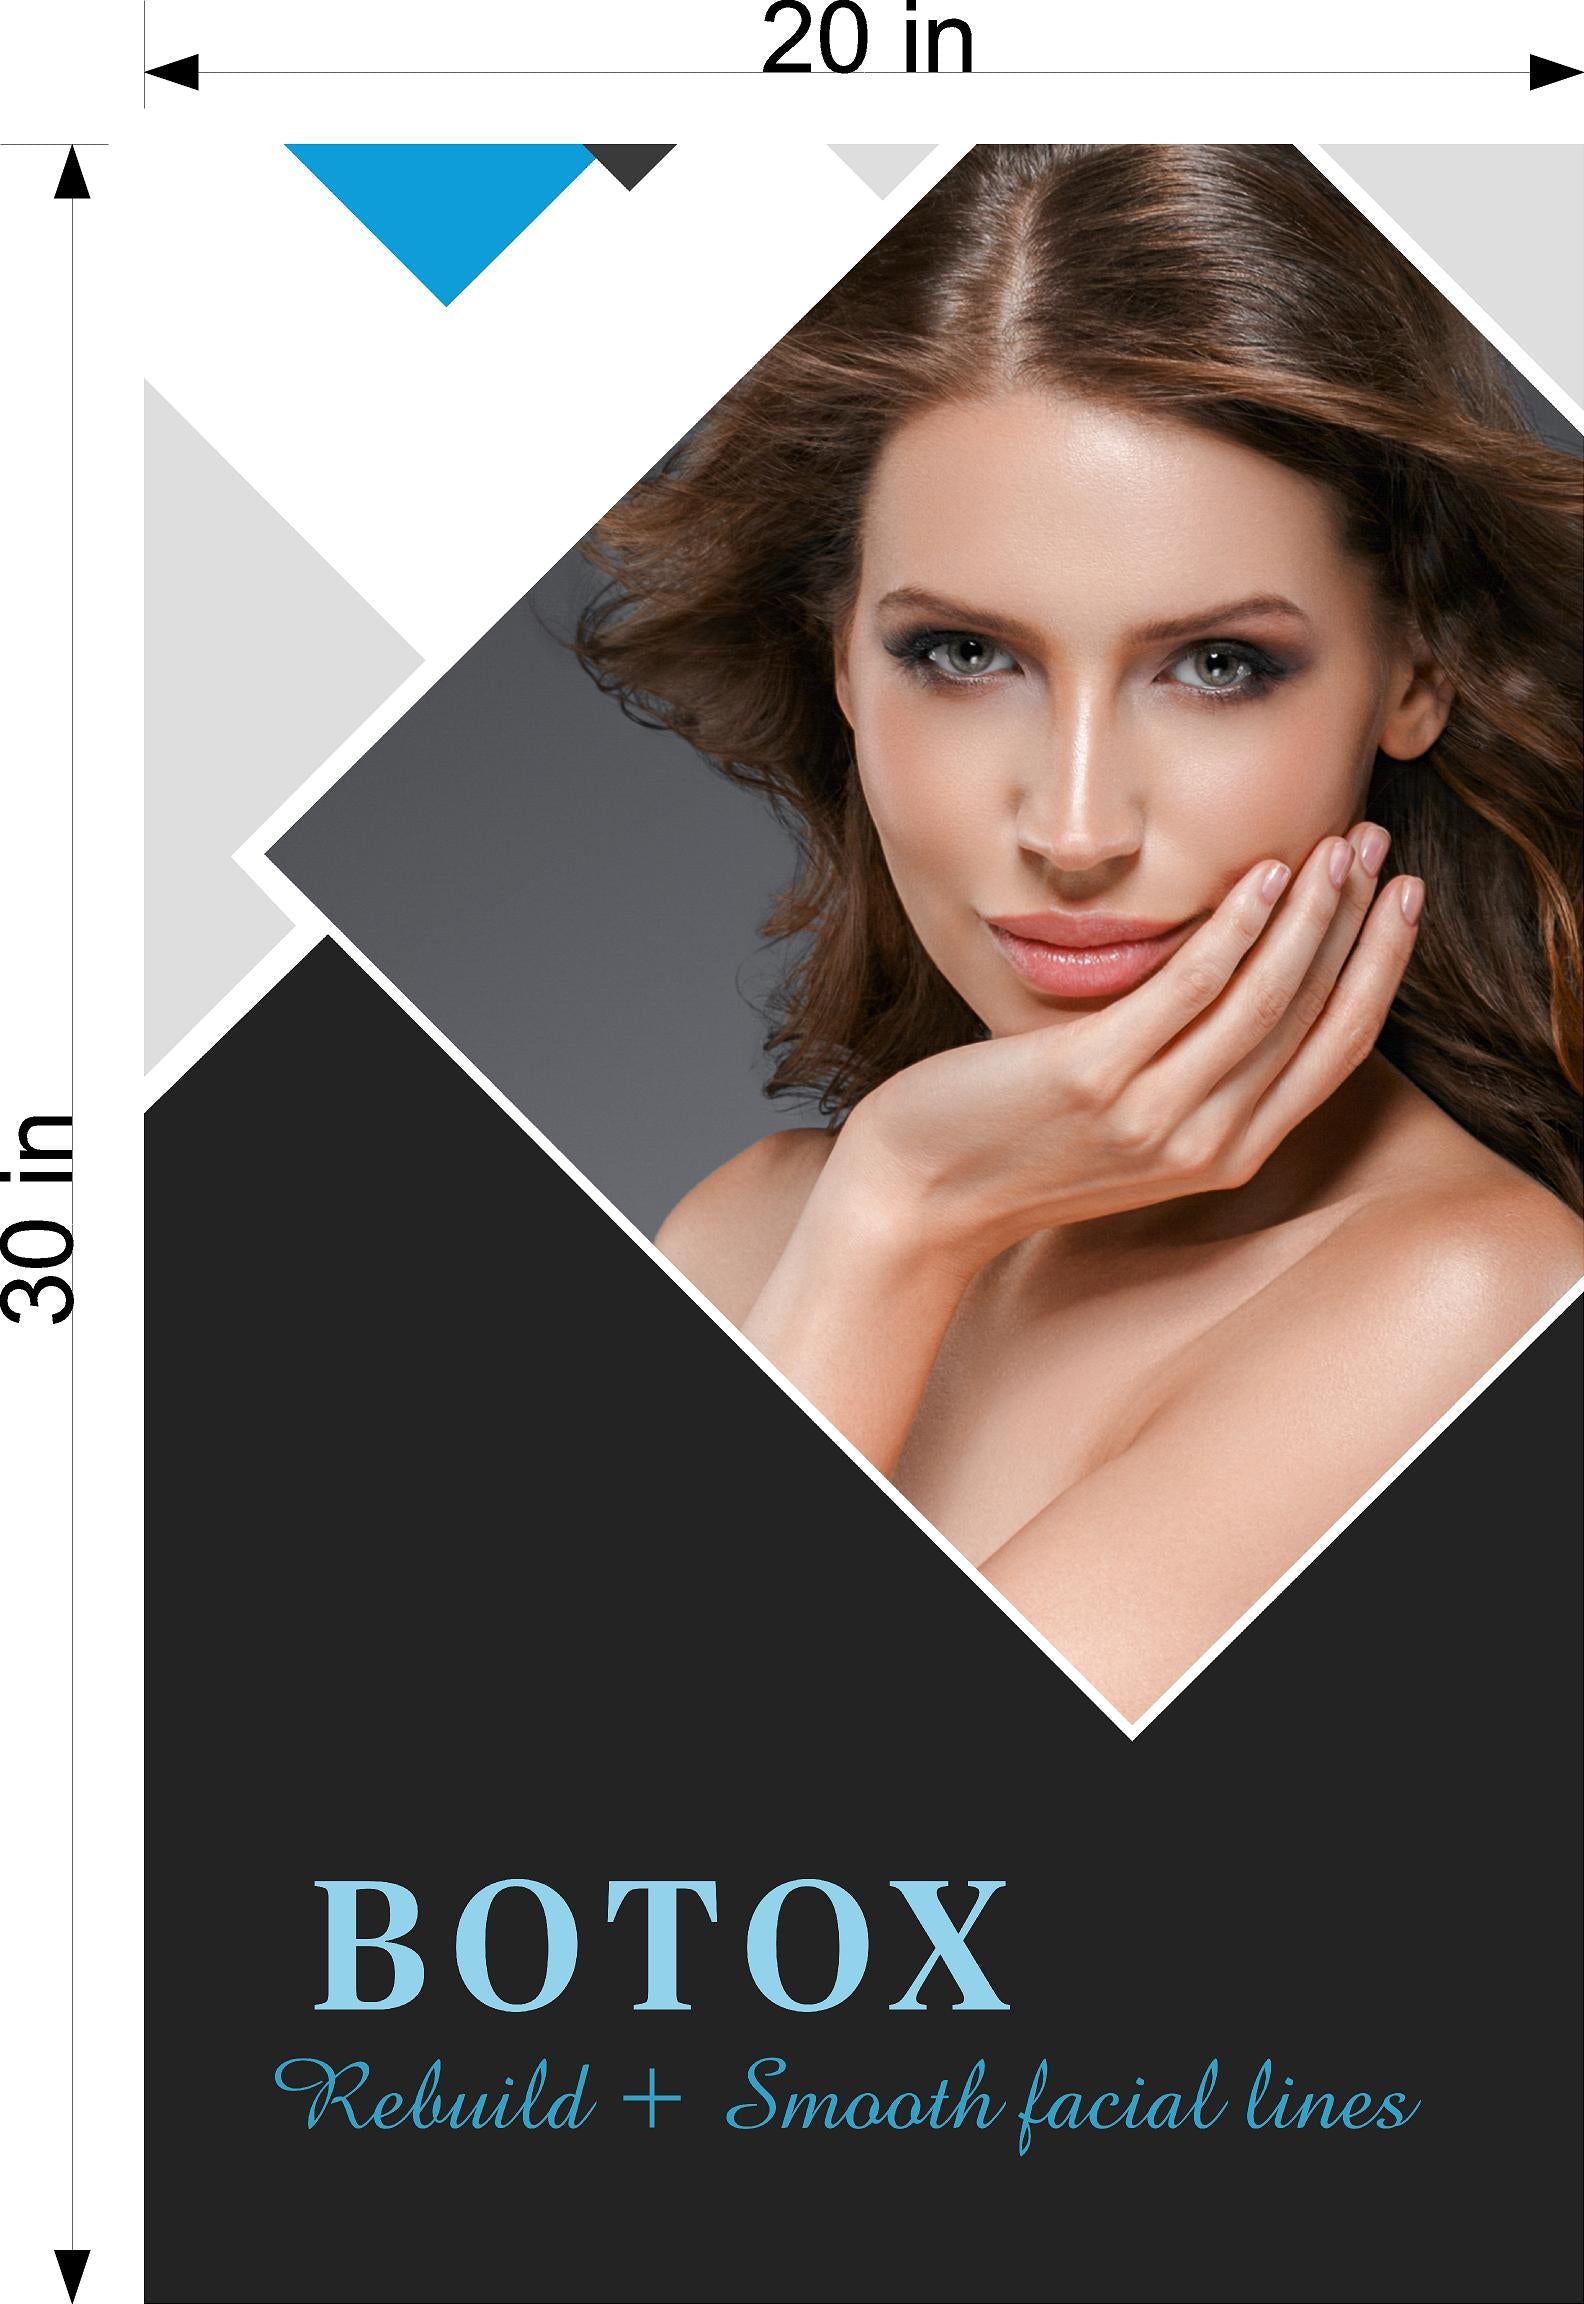 Botox 12 Photo-Realistic Paper Poster Premium Interior Inside Sign Advertising Marketing Wall Window Non-Laminated Vertical